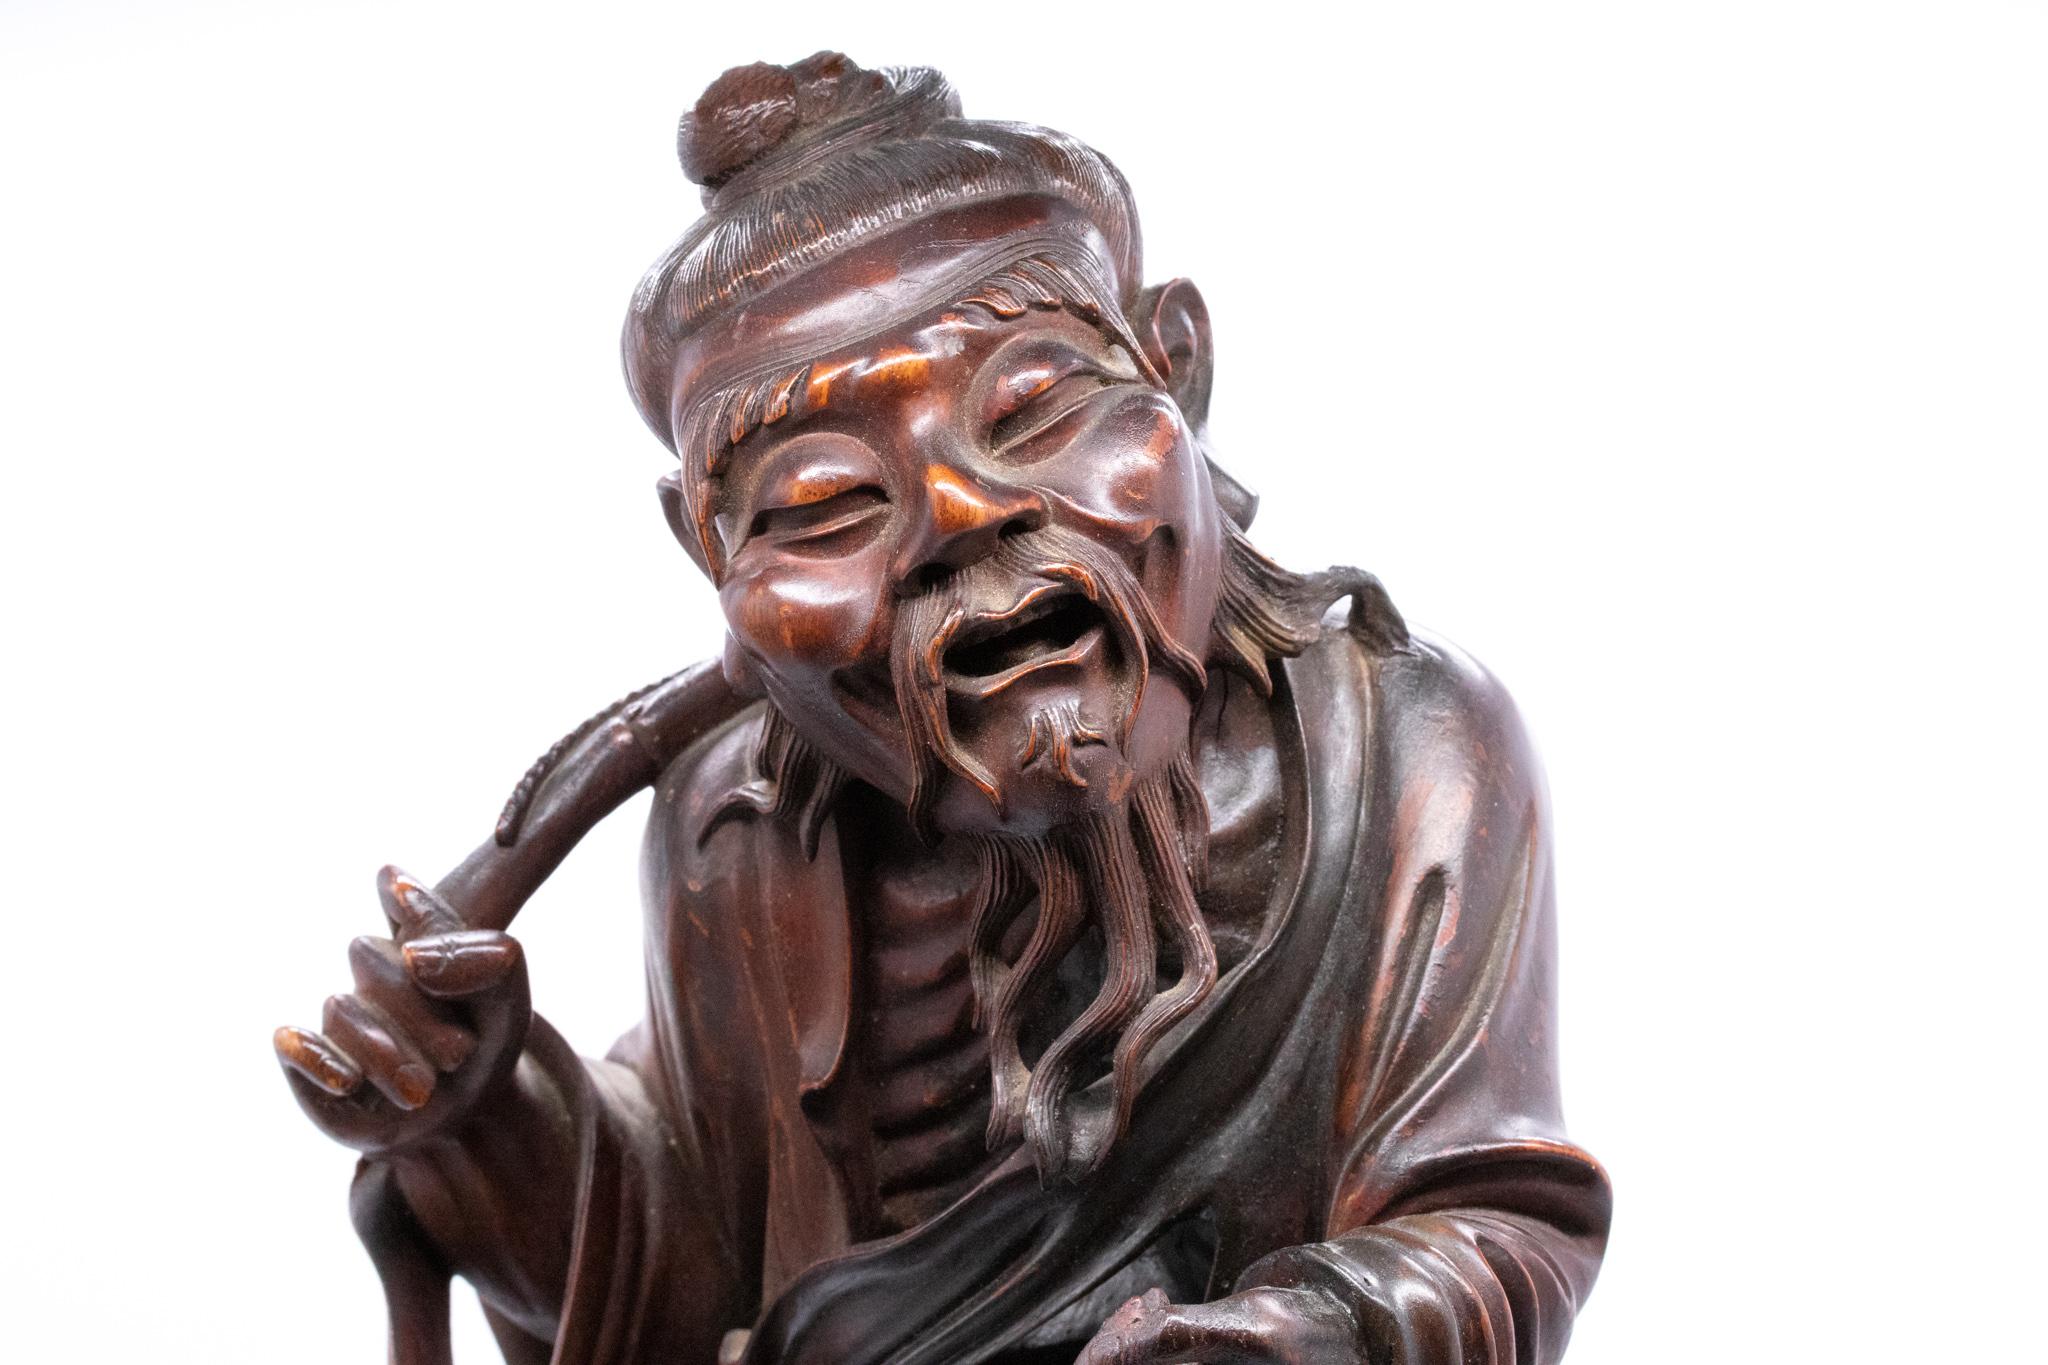 Hand-Carved Japan 1890 Meiji Period Ebisu Sculpture in Wood Carving of an Old Fisherman For Sale